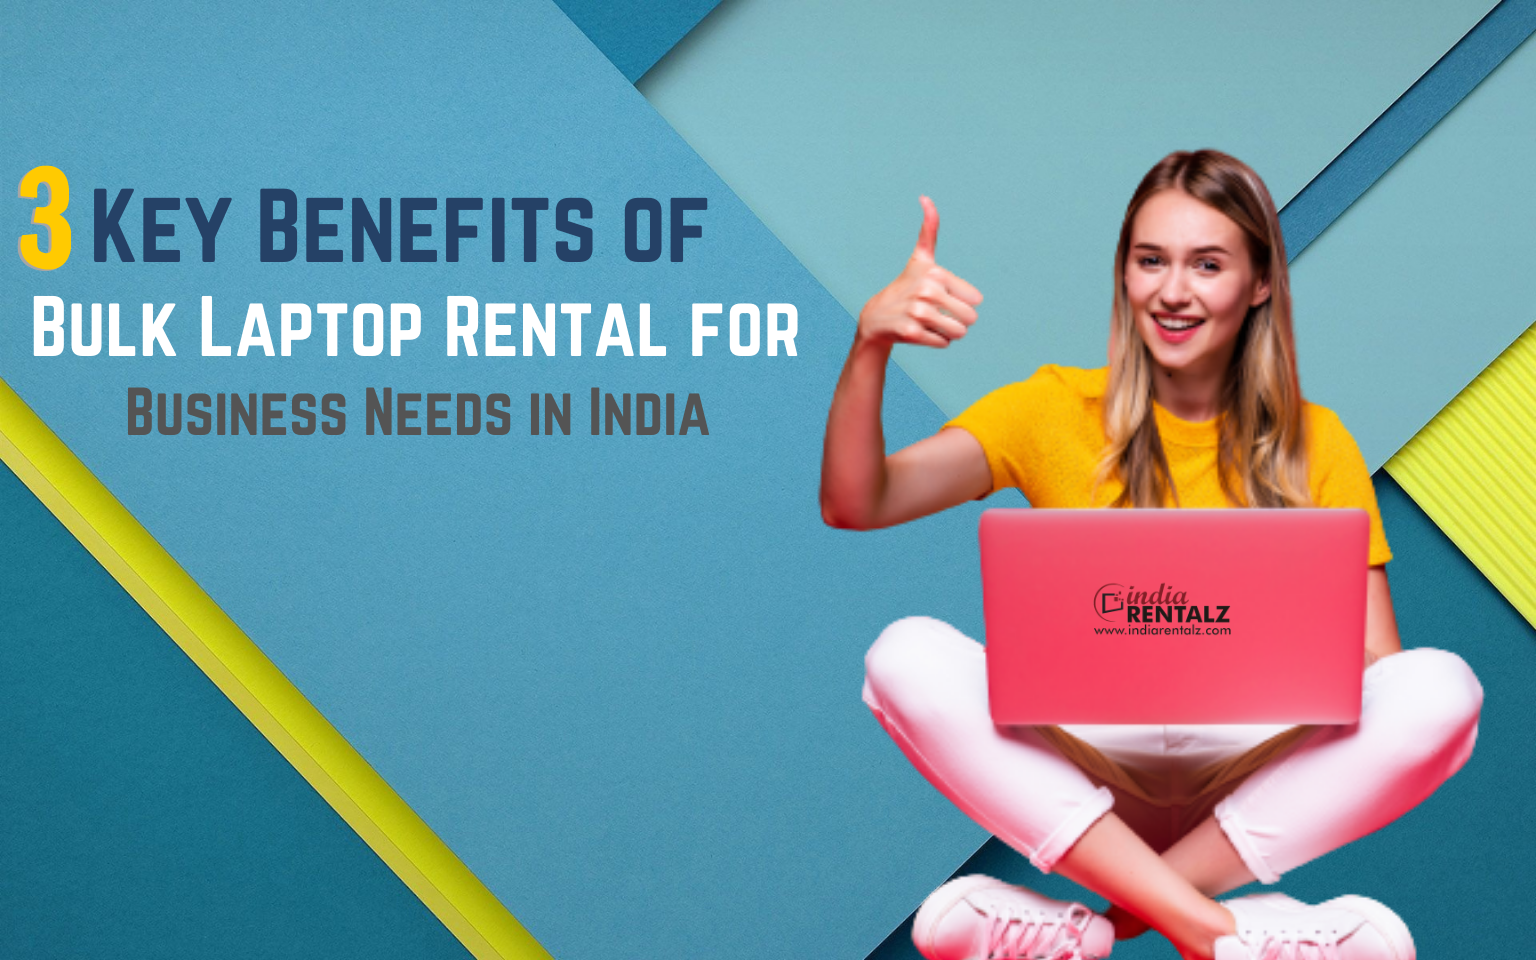 3 Key Benefits of Bulk Laptop Rental for Business Needs in India